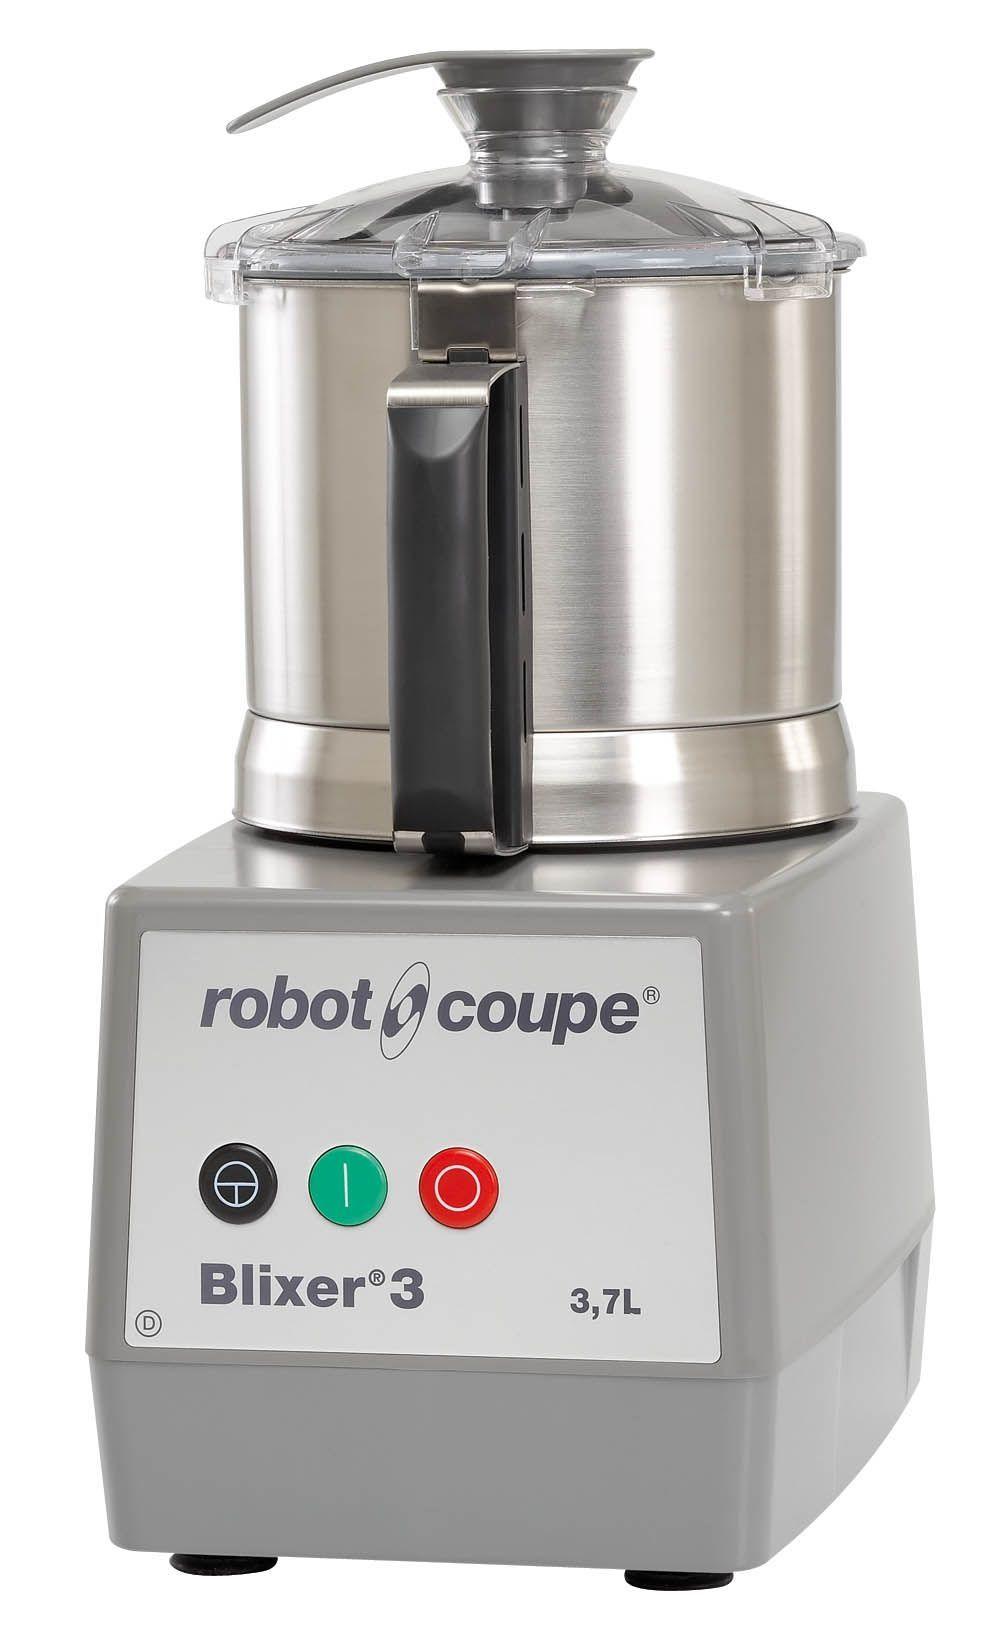 Robot Coupe Blixer 3 Food Processor with 3.7L Stainless Steel Bowl Blender Mixer - HospoStore